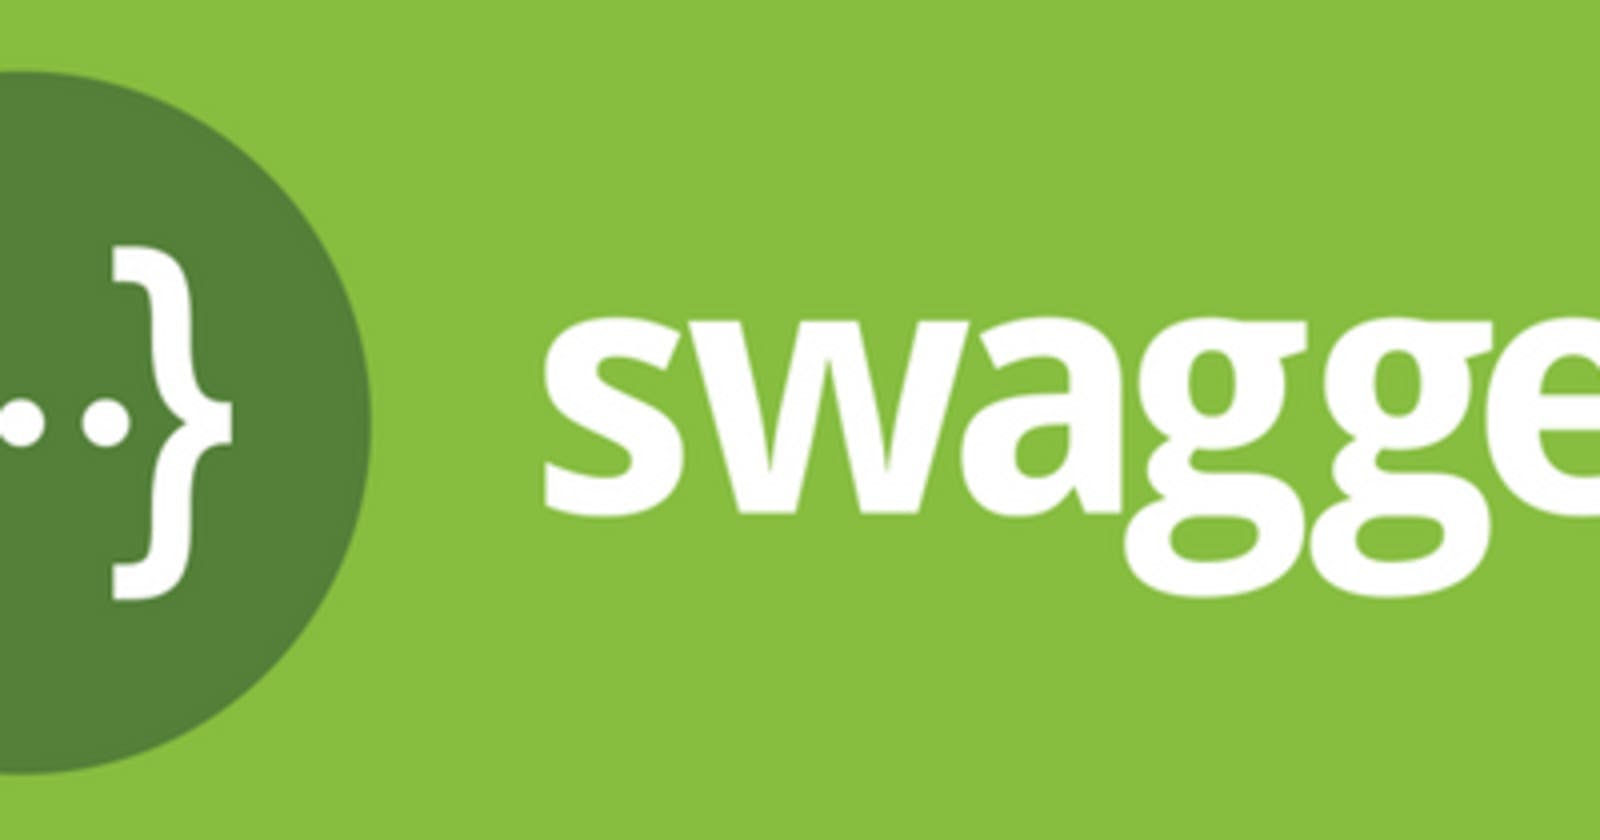 Dear Student,when you config Swagger with springboot